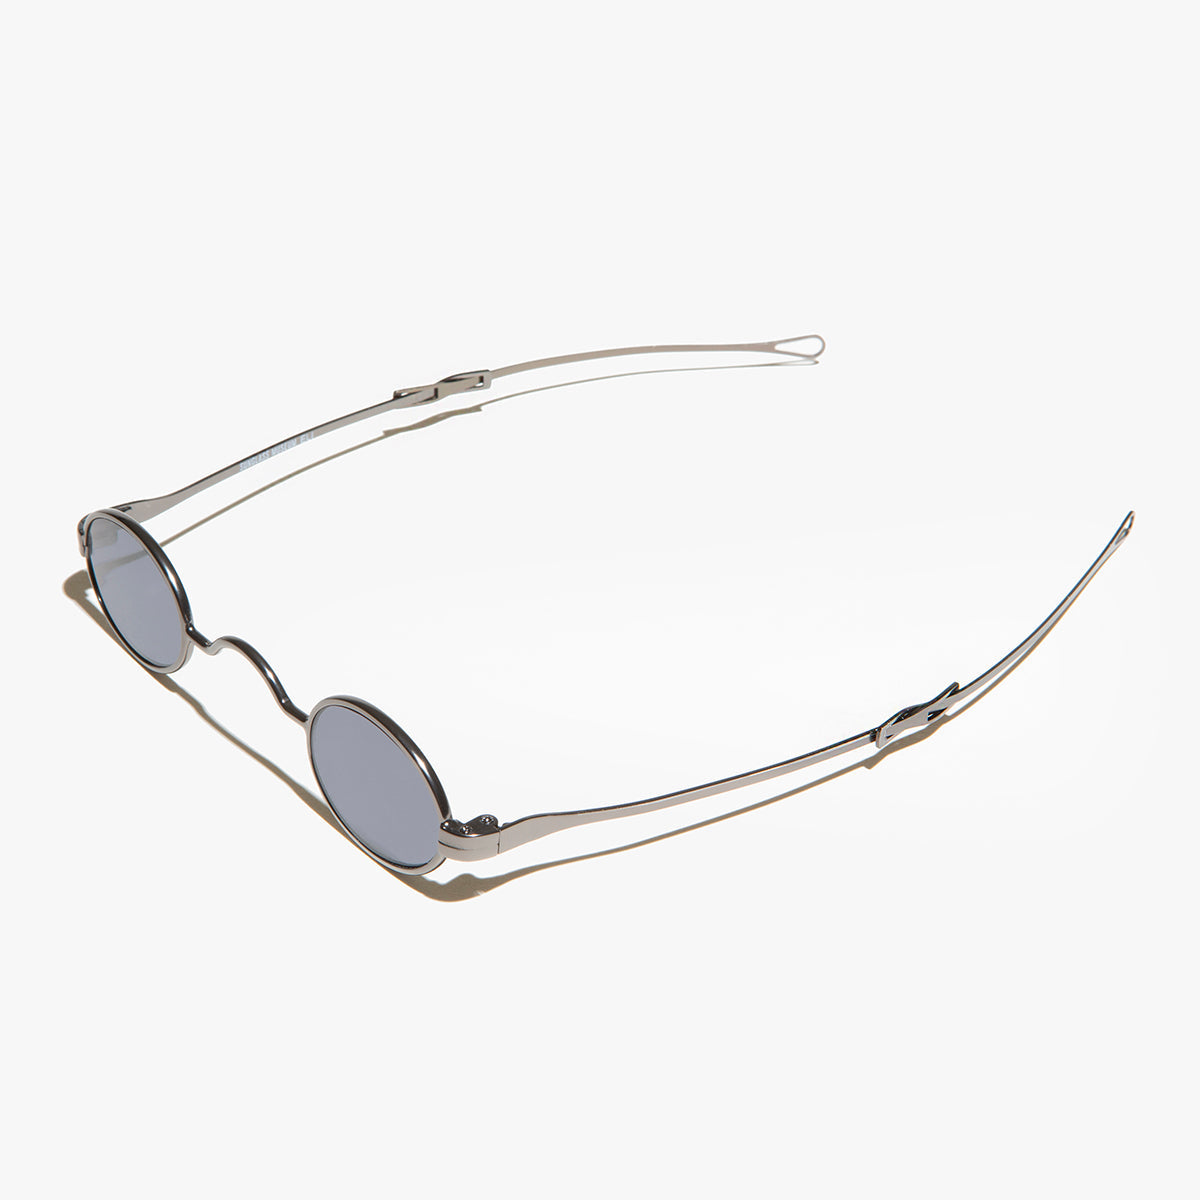 Tiny Oval Spectacle Sunglass with Sliding Temples - Eli